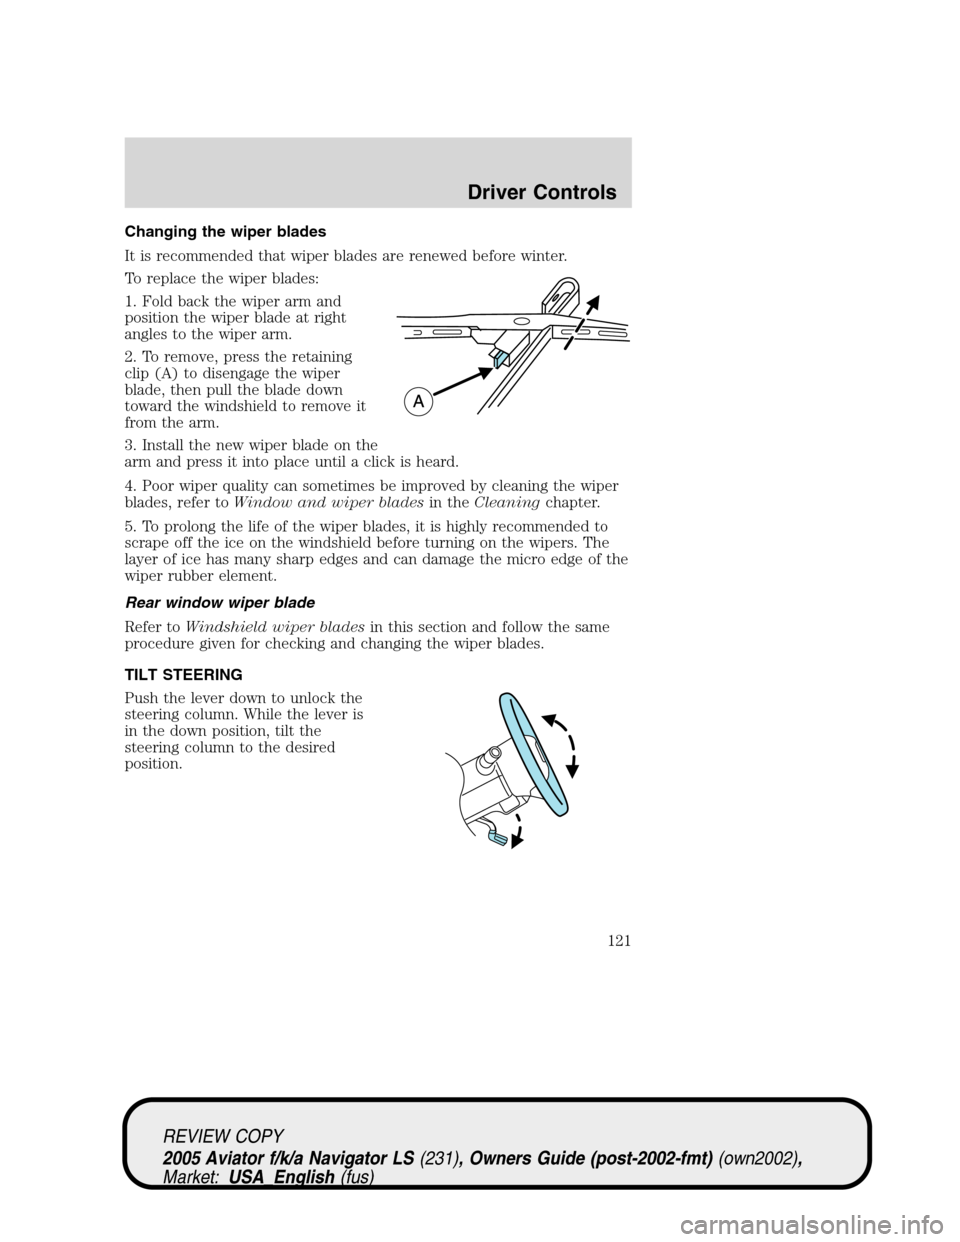 LINCOLN AVIATOR 2005 User Guide Changing the wiper blades
It is recommended that wiper blades are renewed before winter.
To replace the wiper blades:
1. Fold back the wiper arm and
position the wiper blade at right
angles to the wip